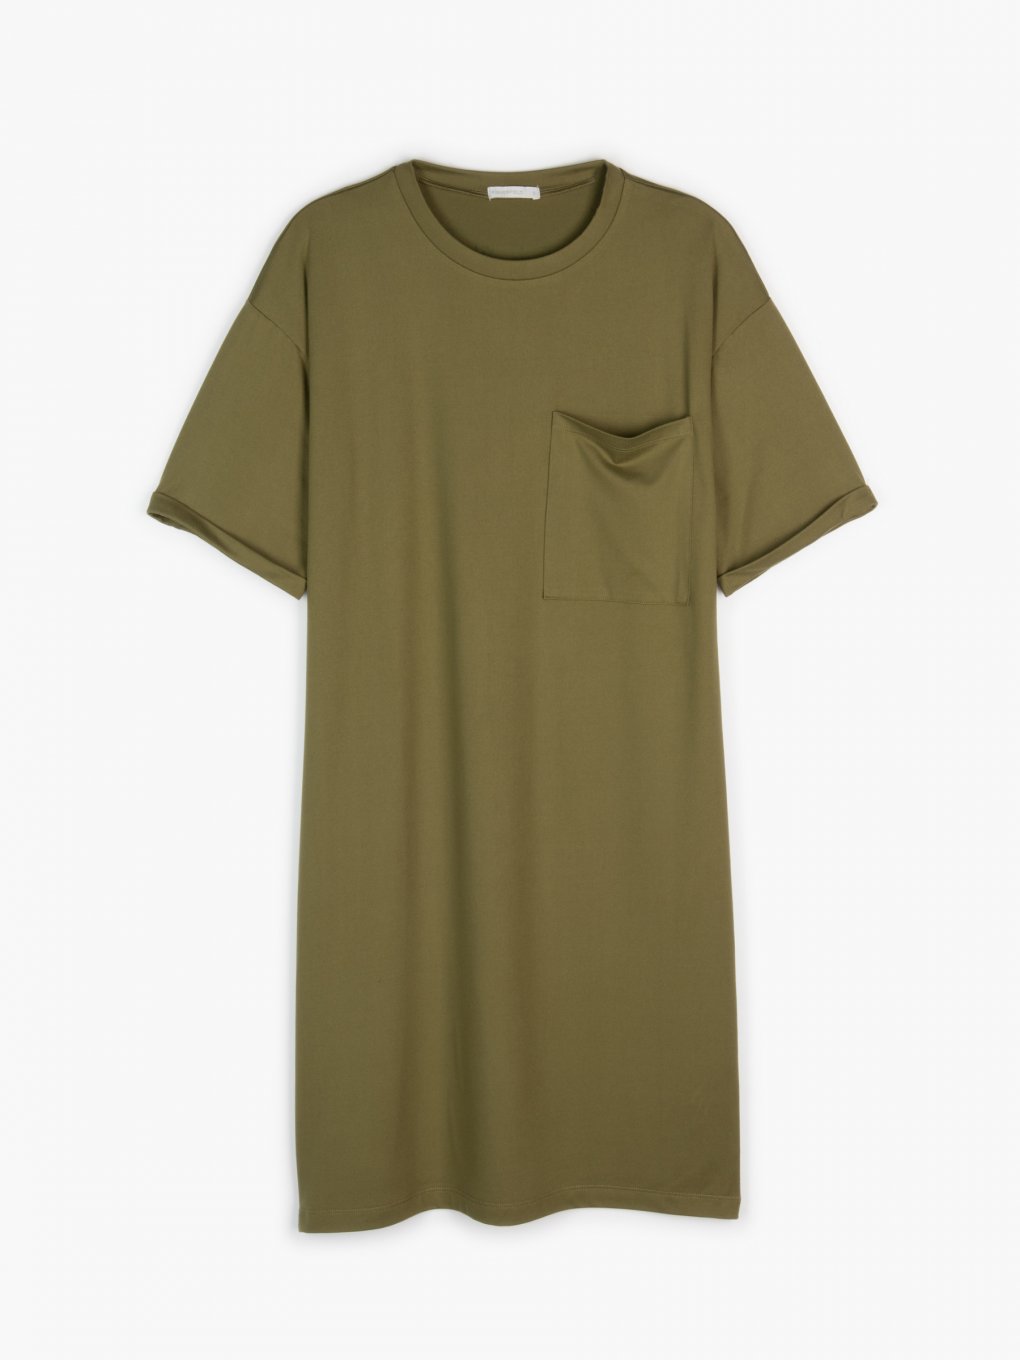 T-shirt dress with chest pocket